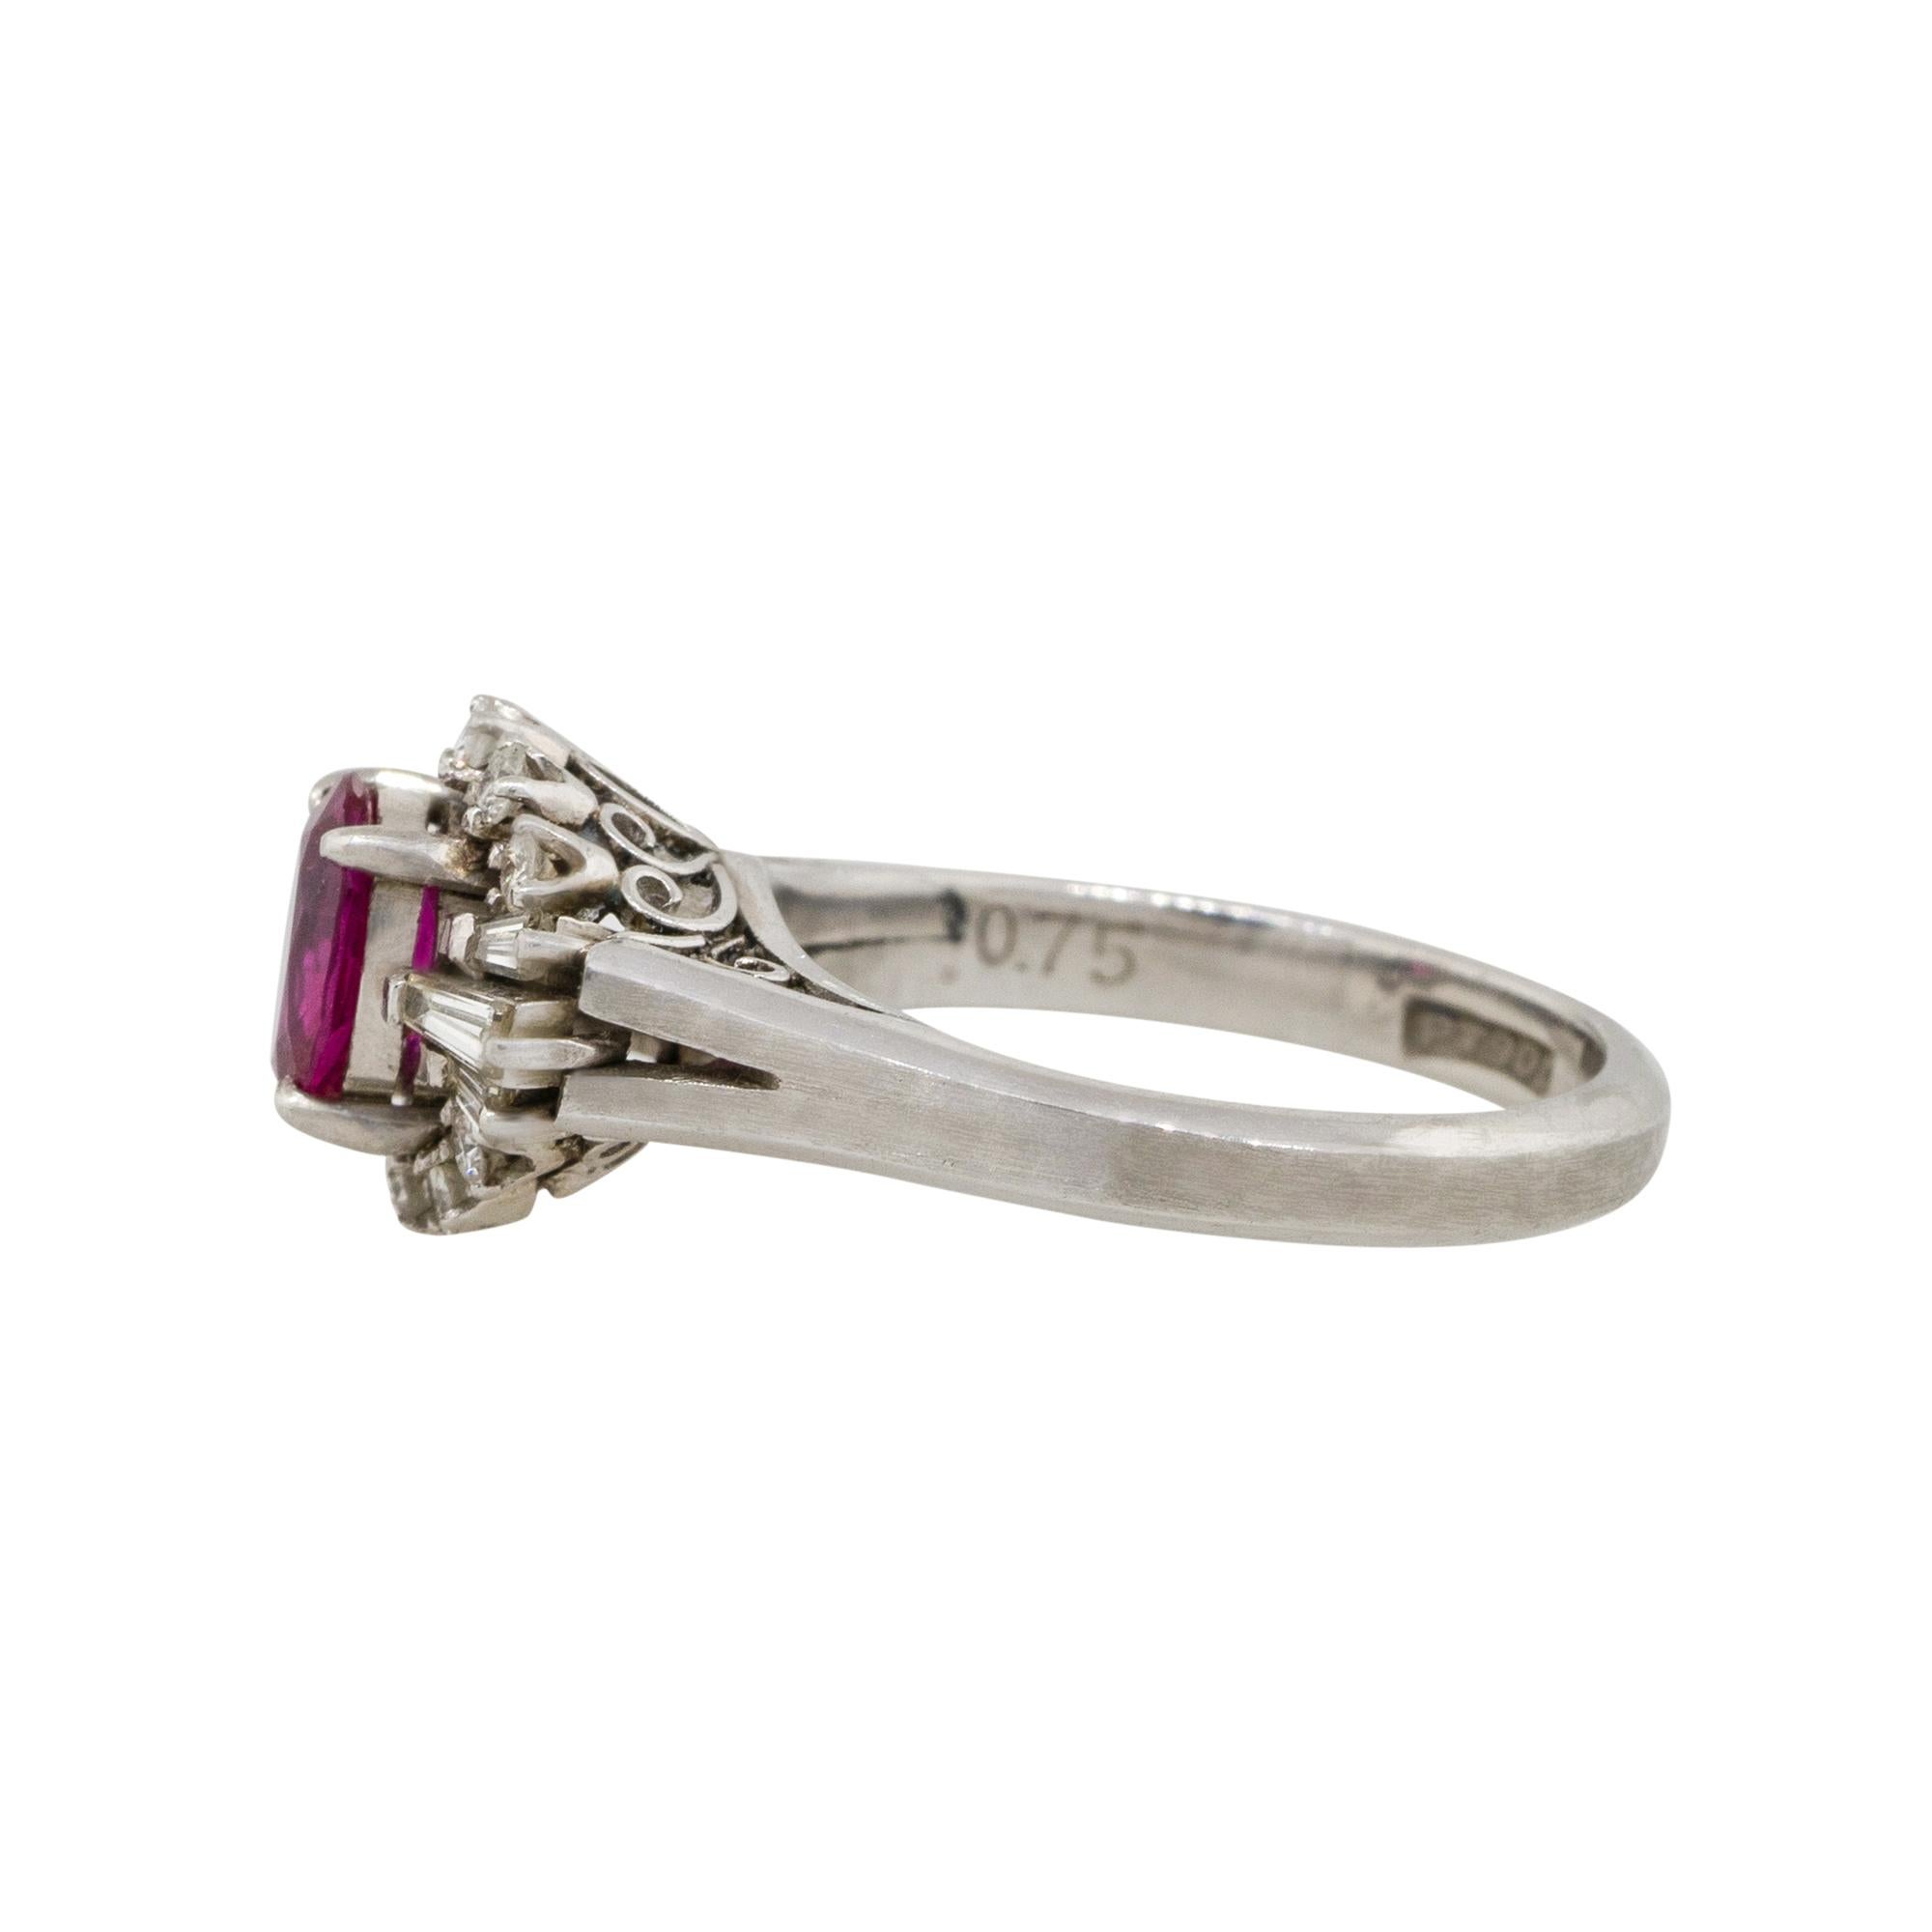 Women's 0.75 Carat Oval Cut Ruby Diamond Cocktail Ring Platinum in Stock For Sale